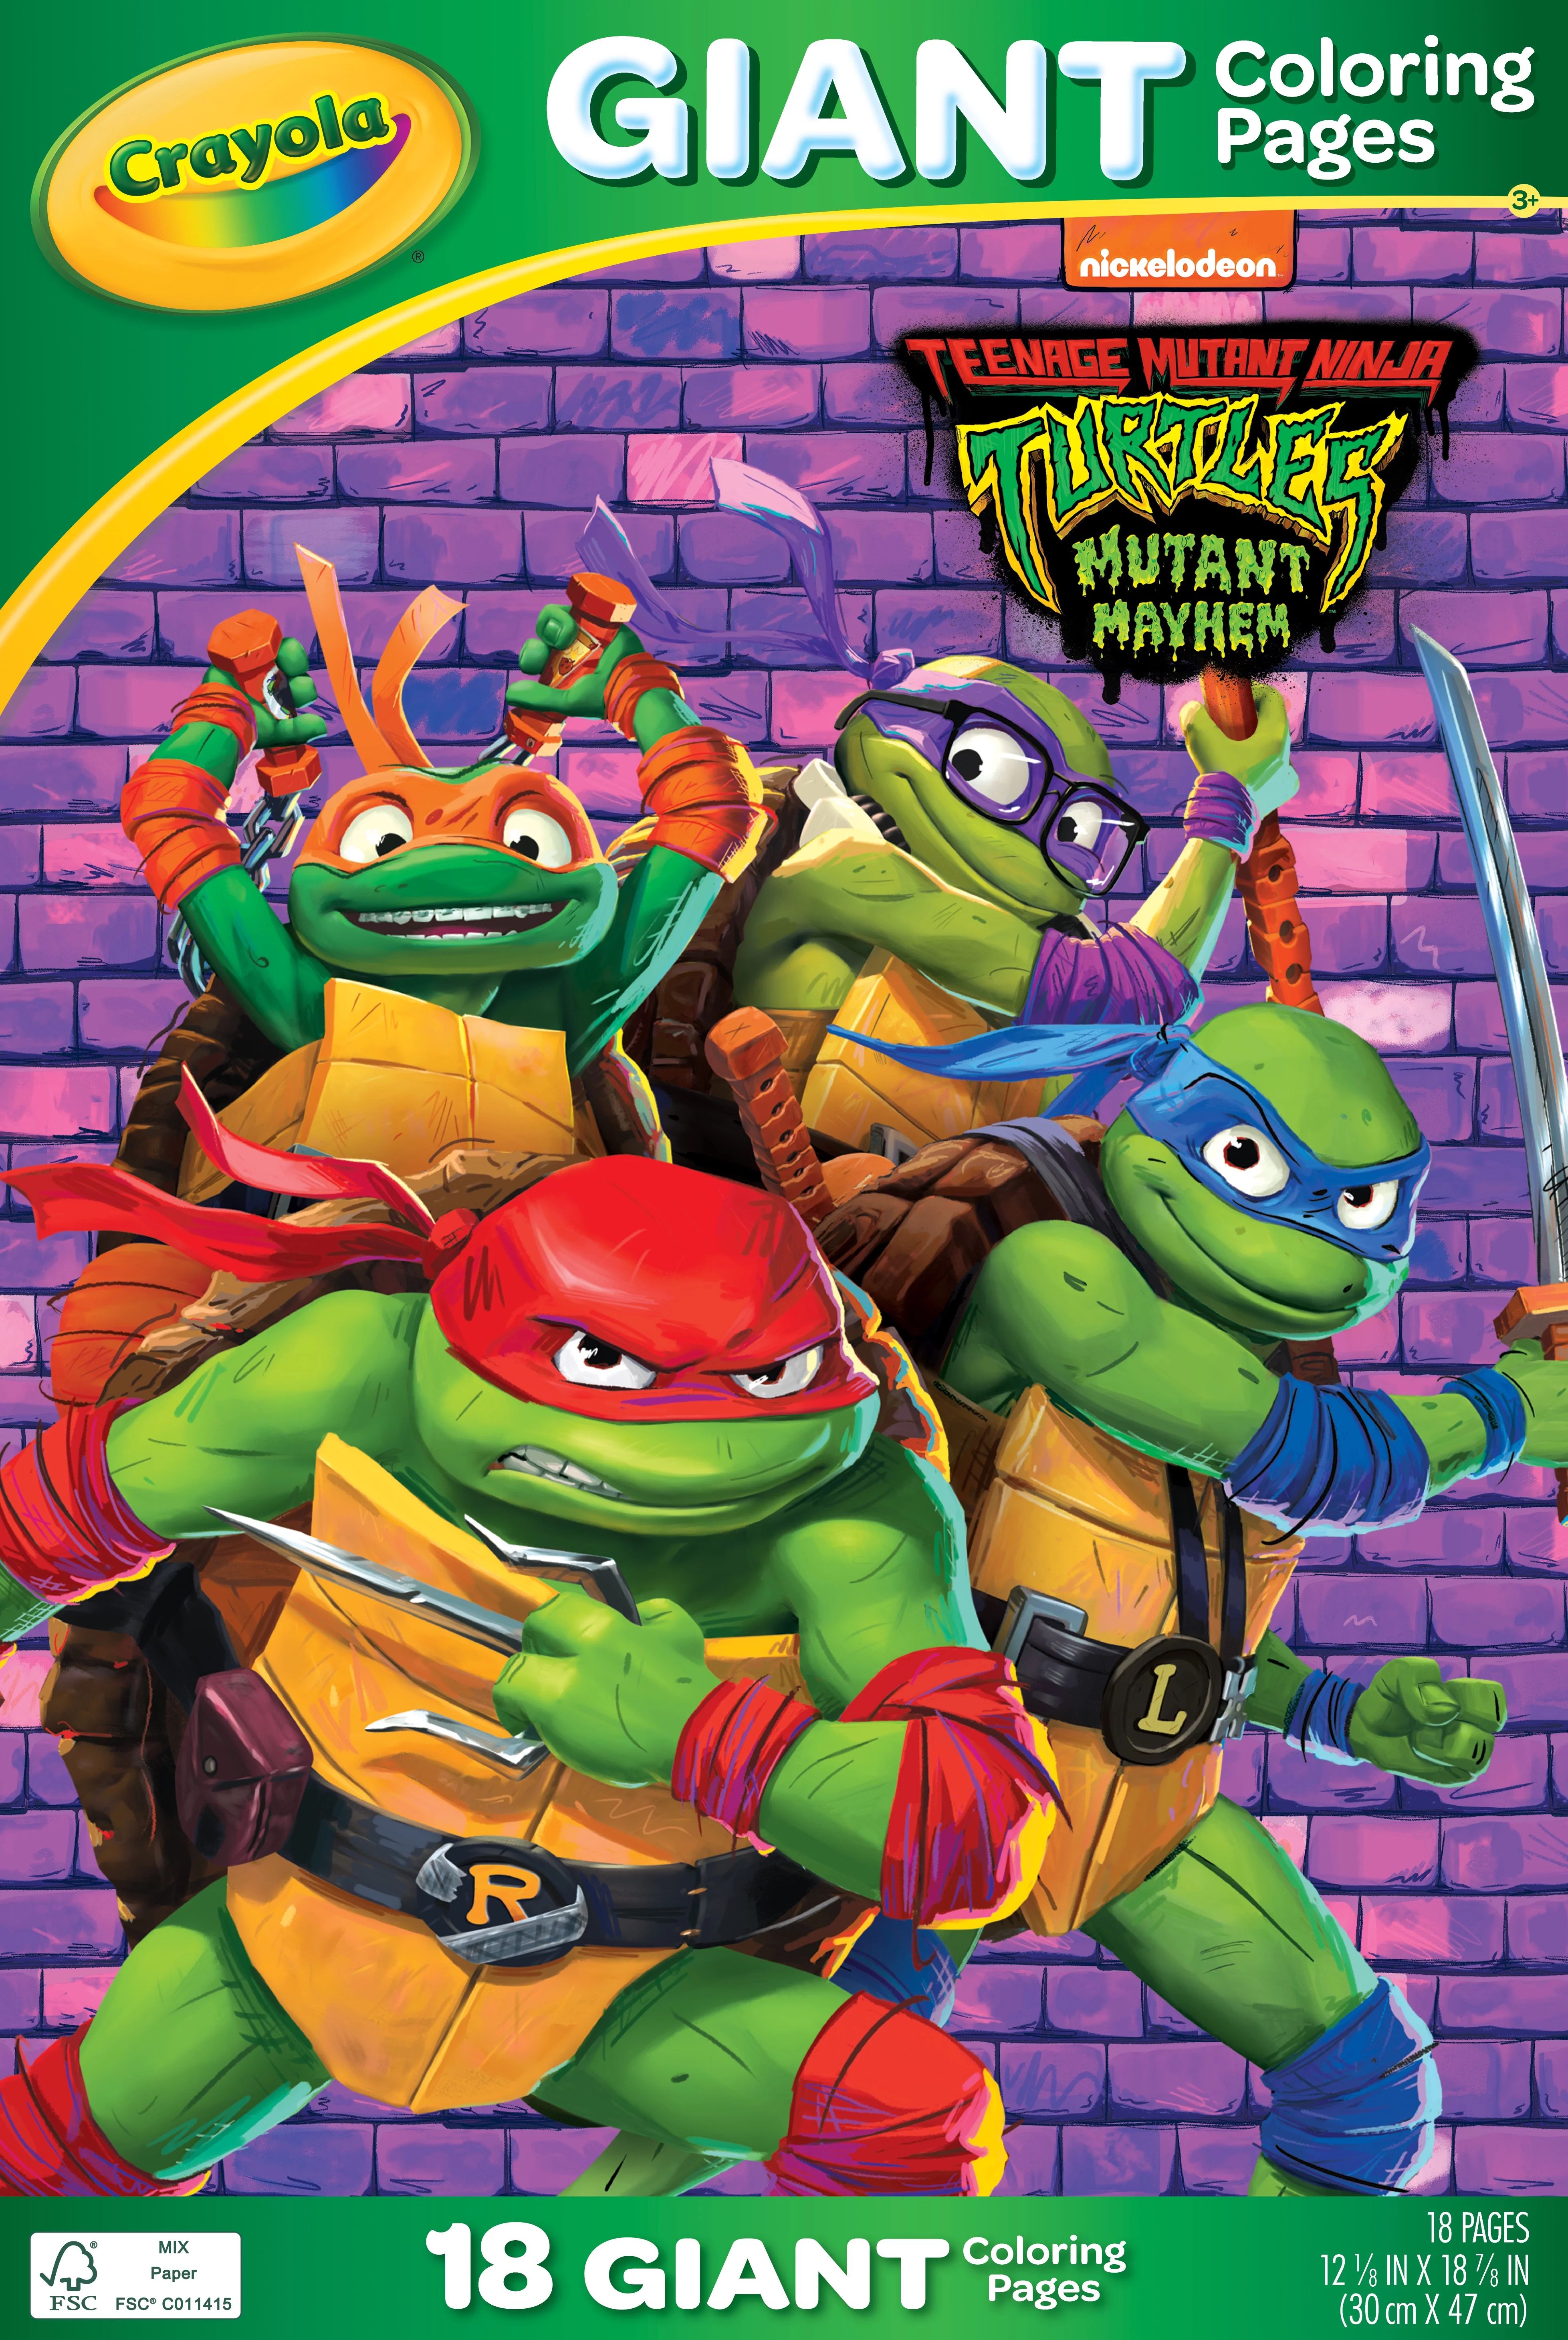 Crayola Teenage Mutant Ninja Turtles Giant Coloring Pages,18 Coloring Pages, Gift, Unisex Child | Walmart (US)